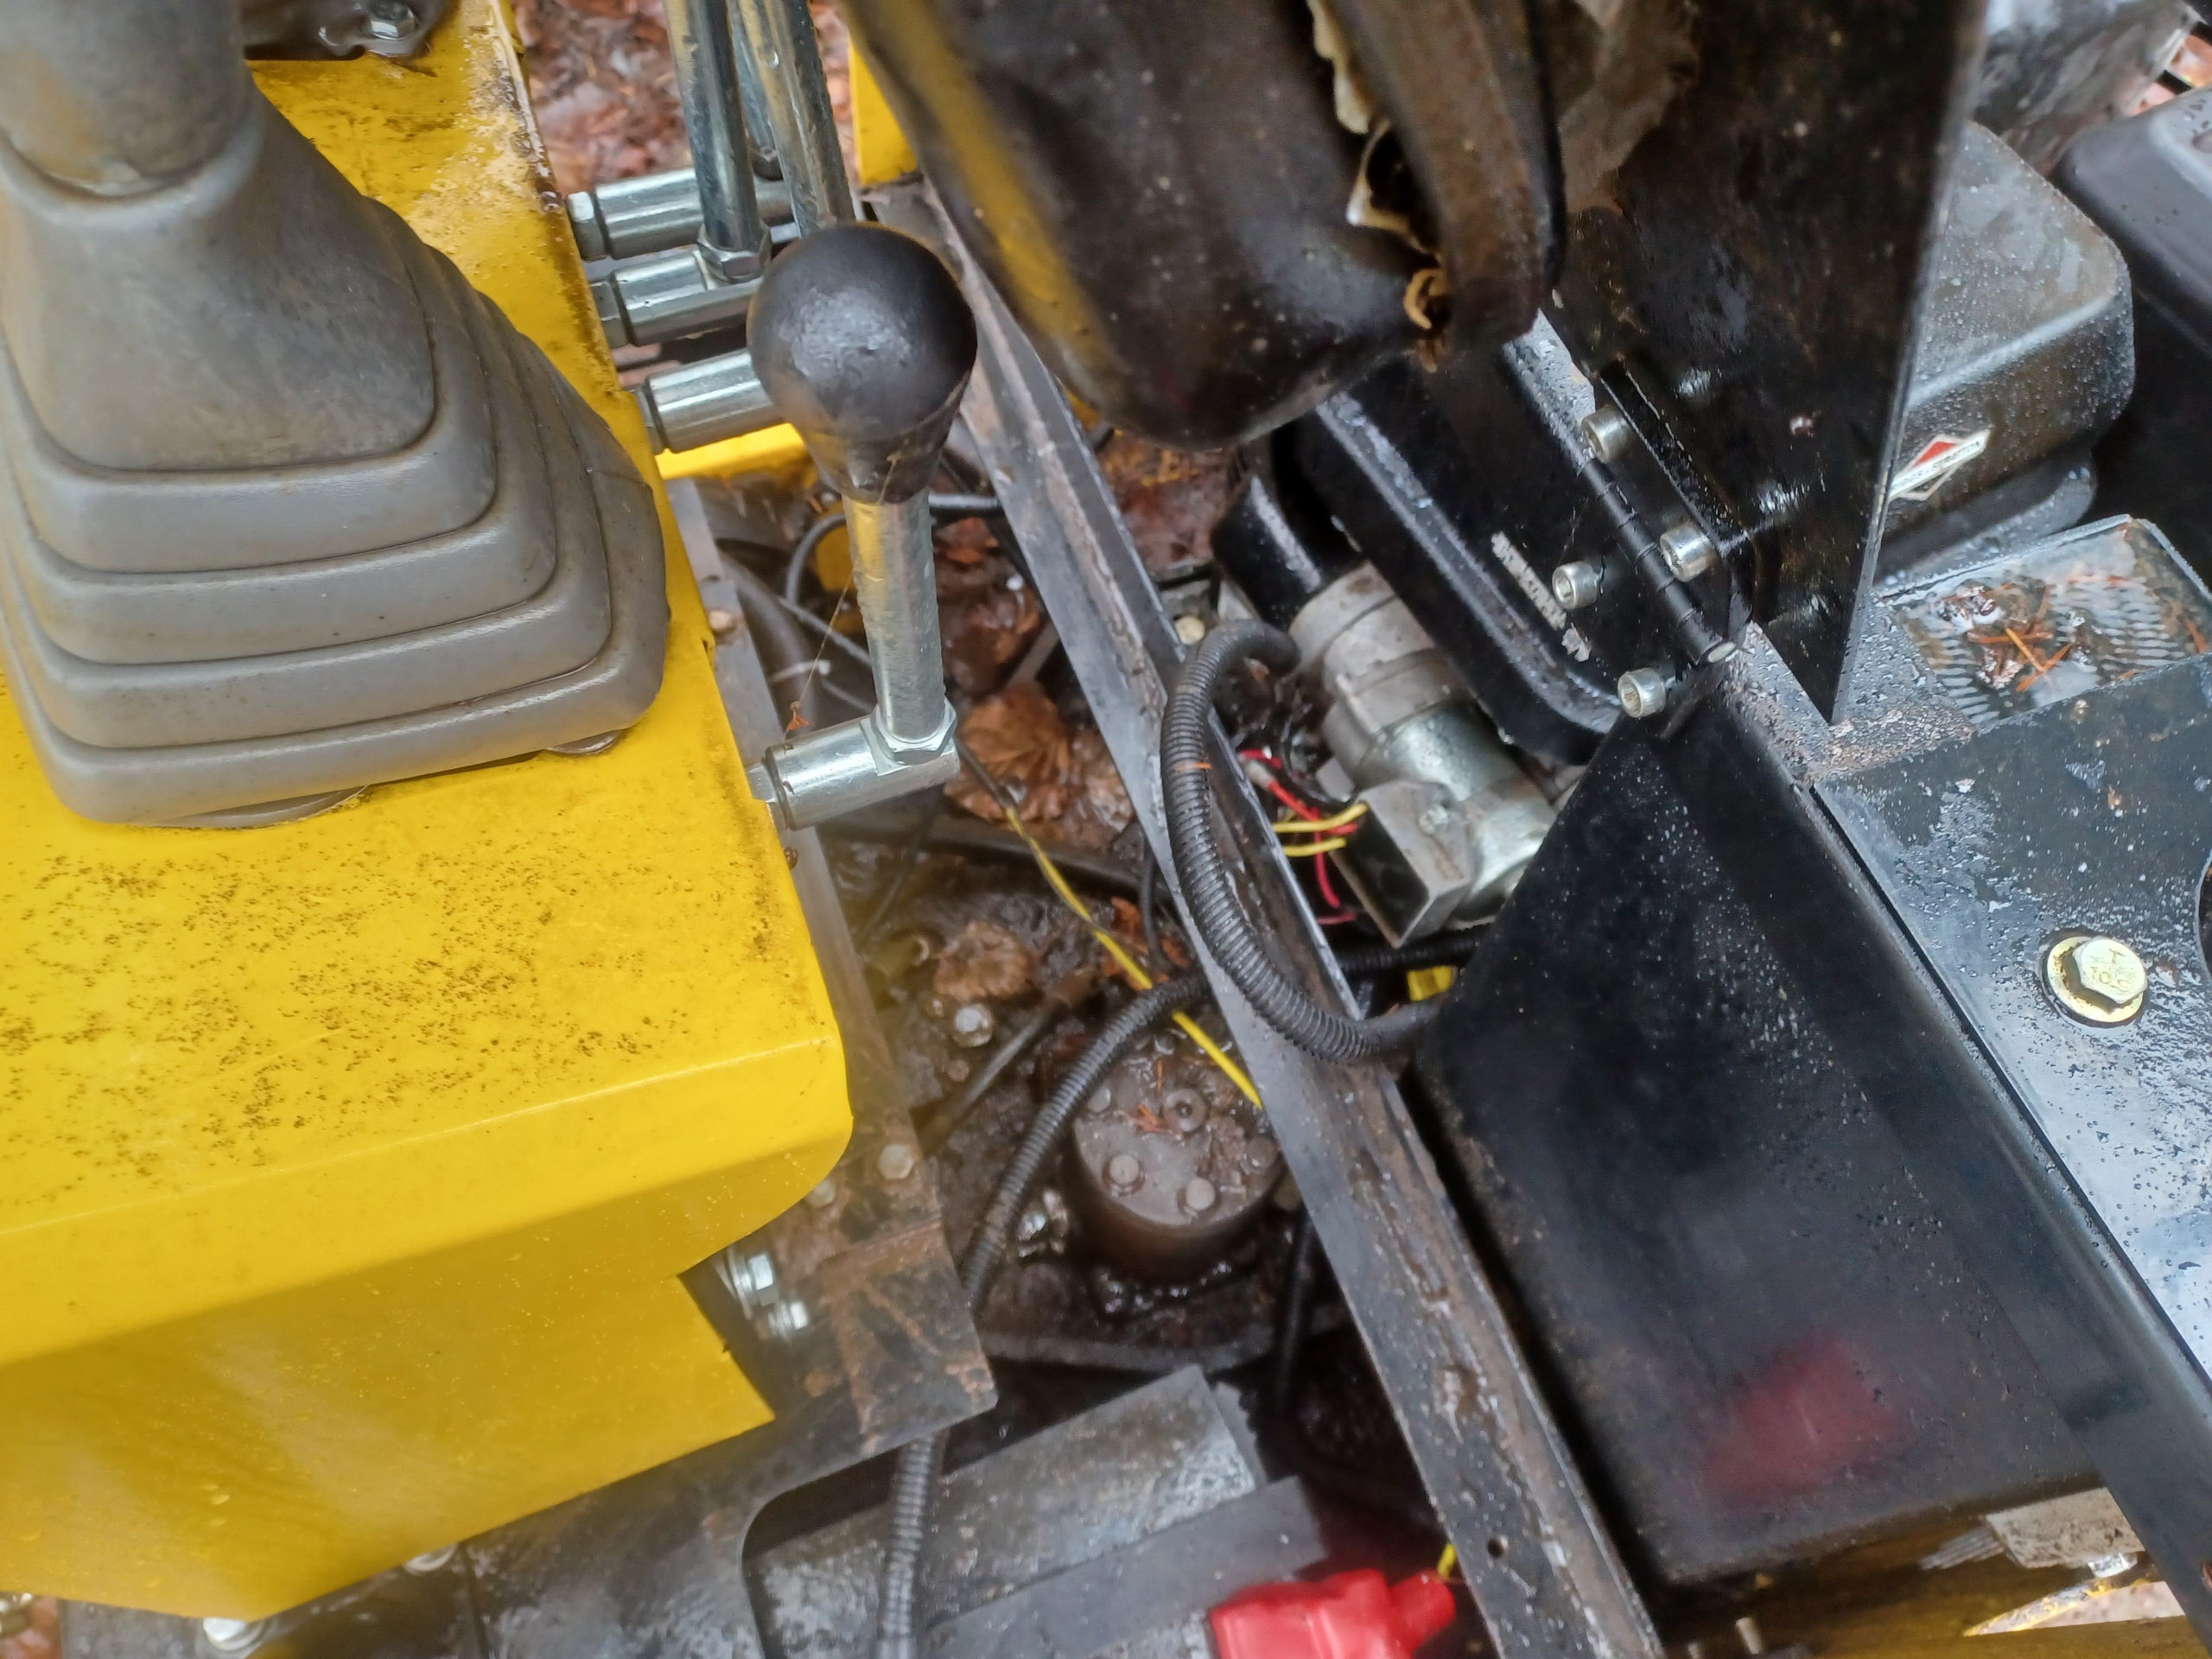 The GroundHog excavator needed a battery, ignition switch, and tune-up. Mobile mechanic in  Woodinville, Washington